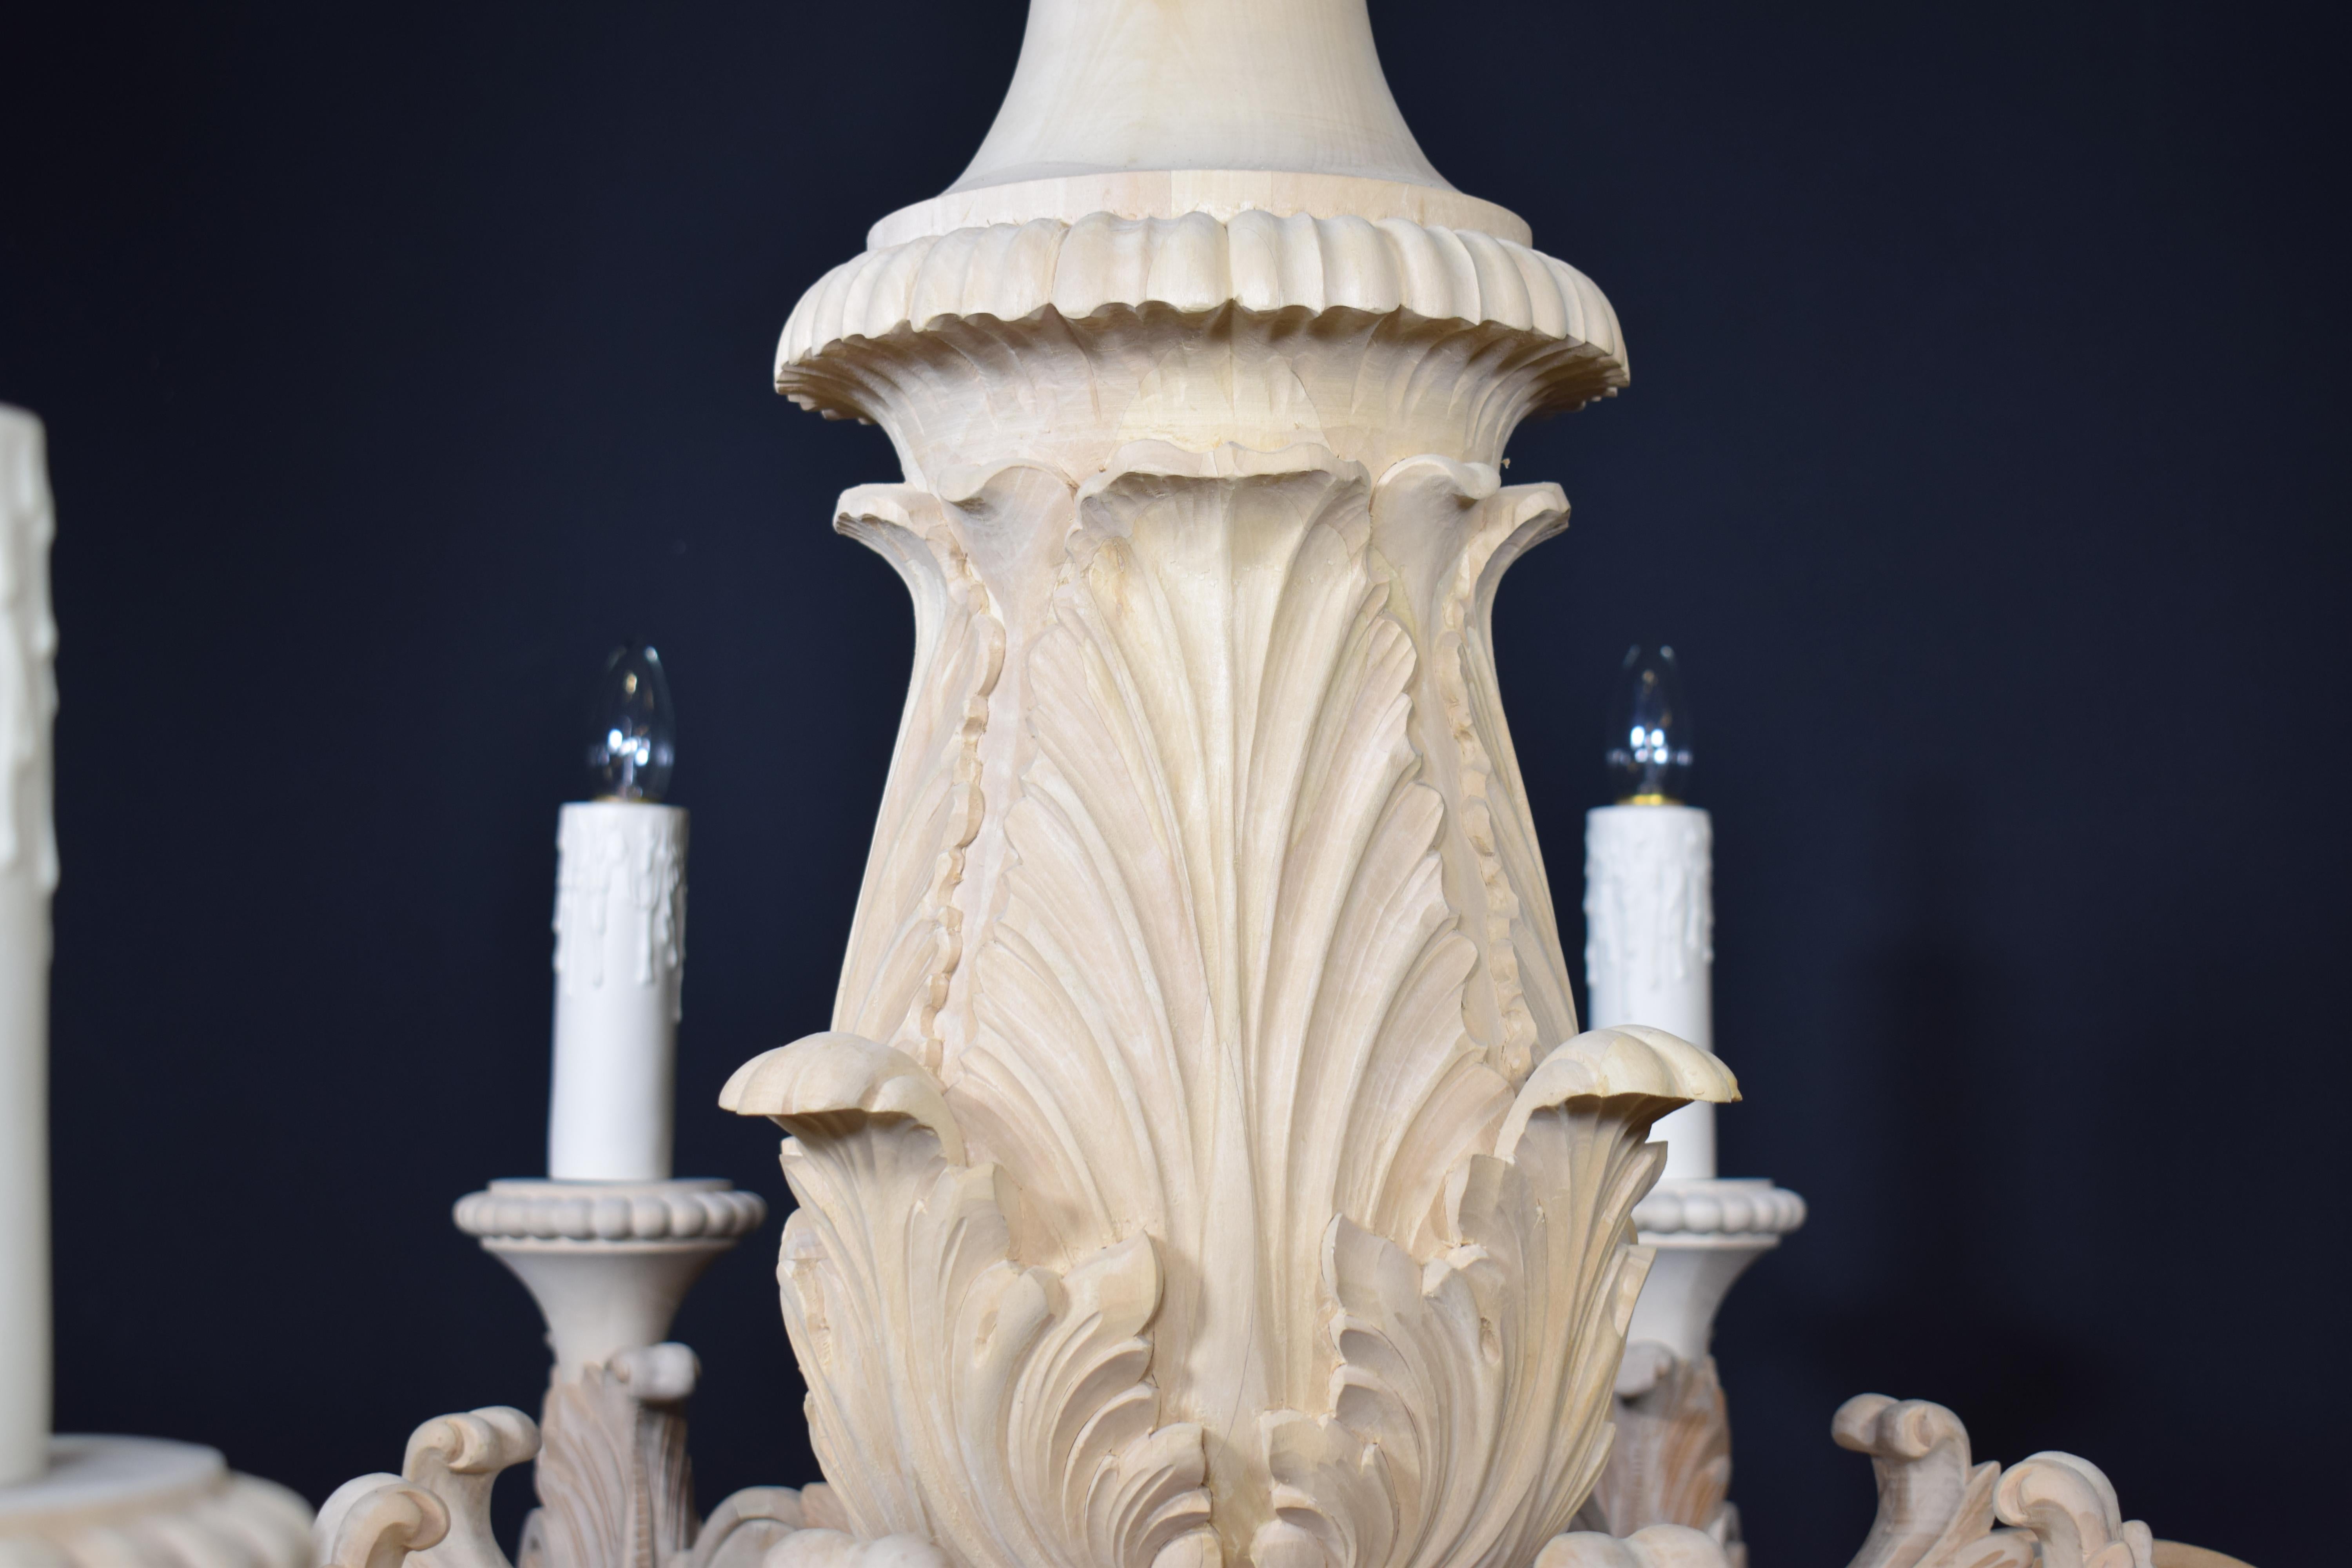 A fine Louis XIV style wooden chandelier. Superb carving work. A true masterpiece.
France, circa 1920. 8 lights.
Dimensions: Height 61